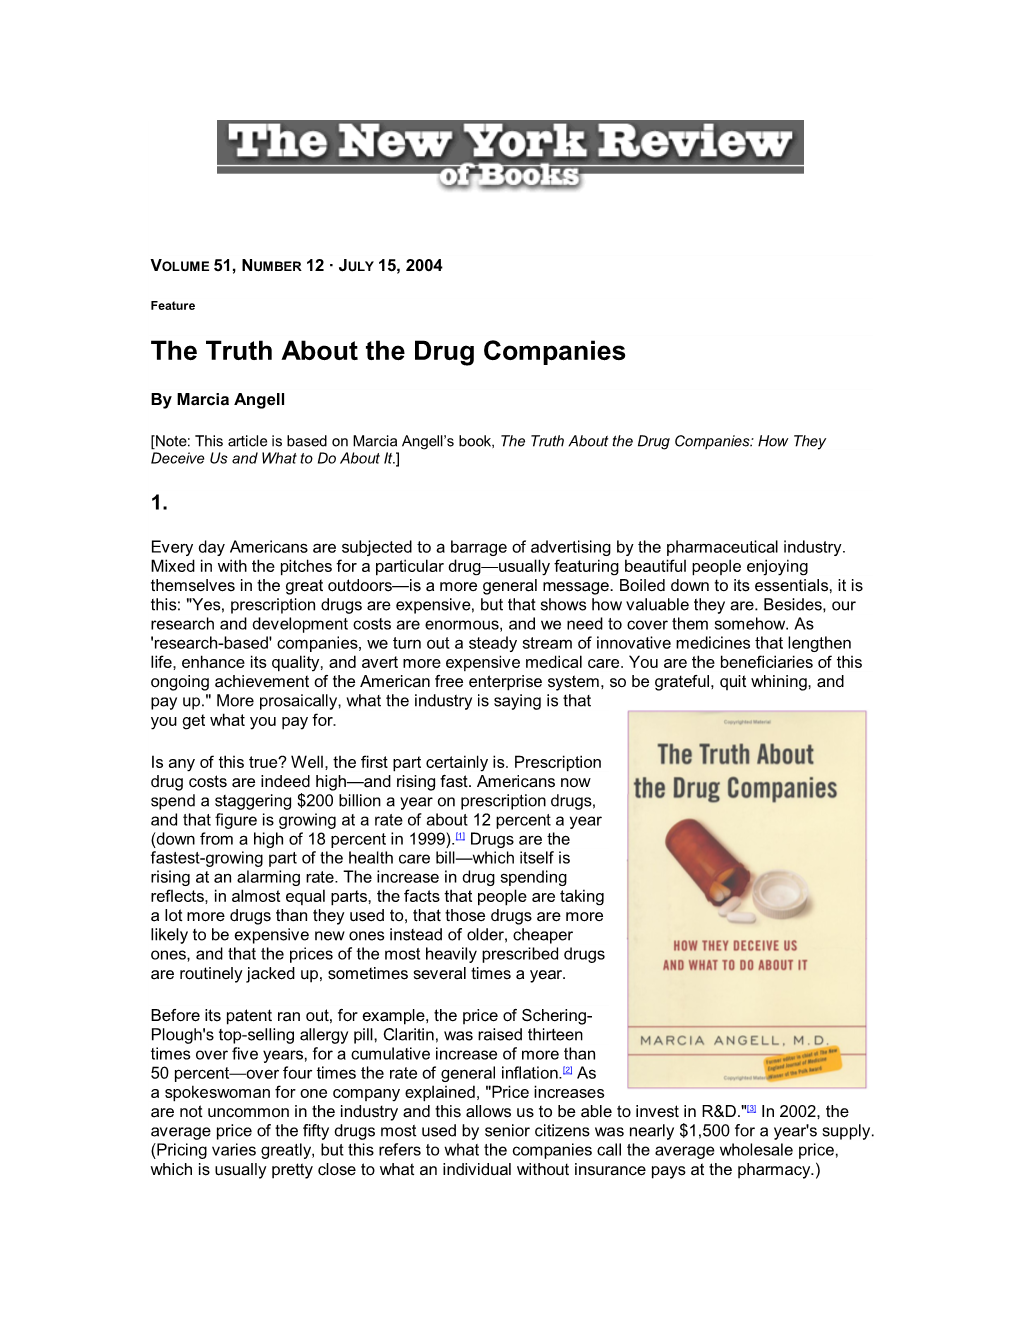 The Truth About the Drug Companies